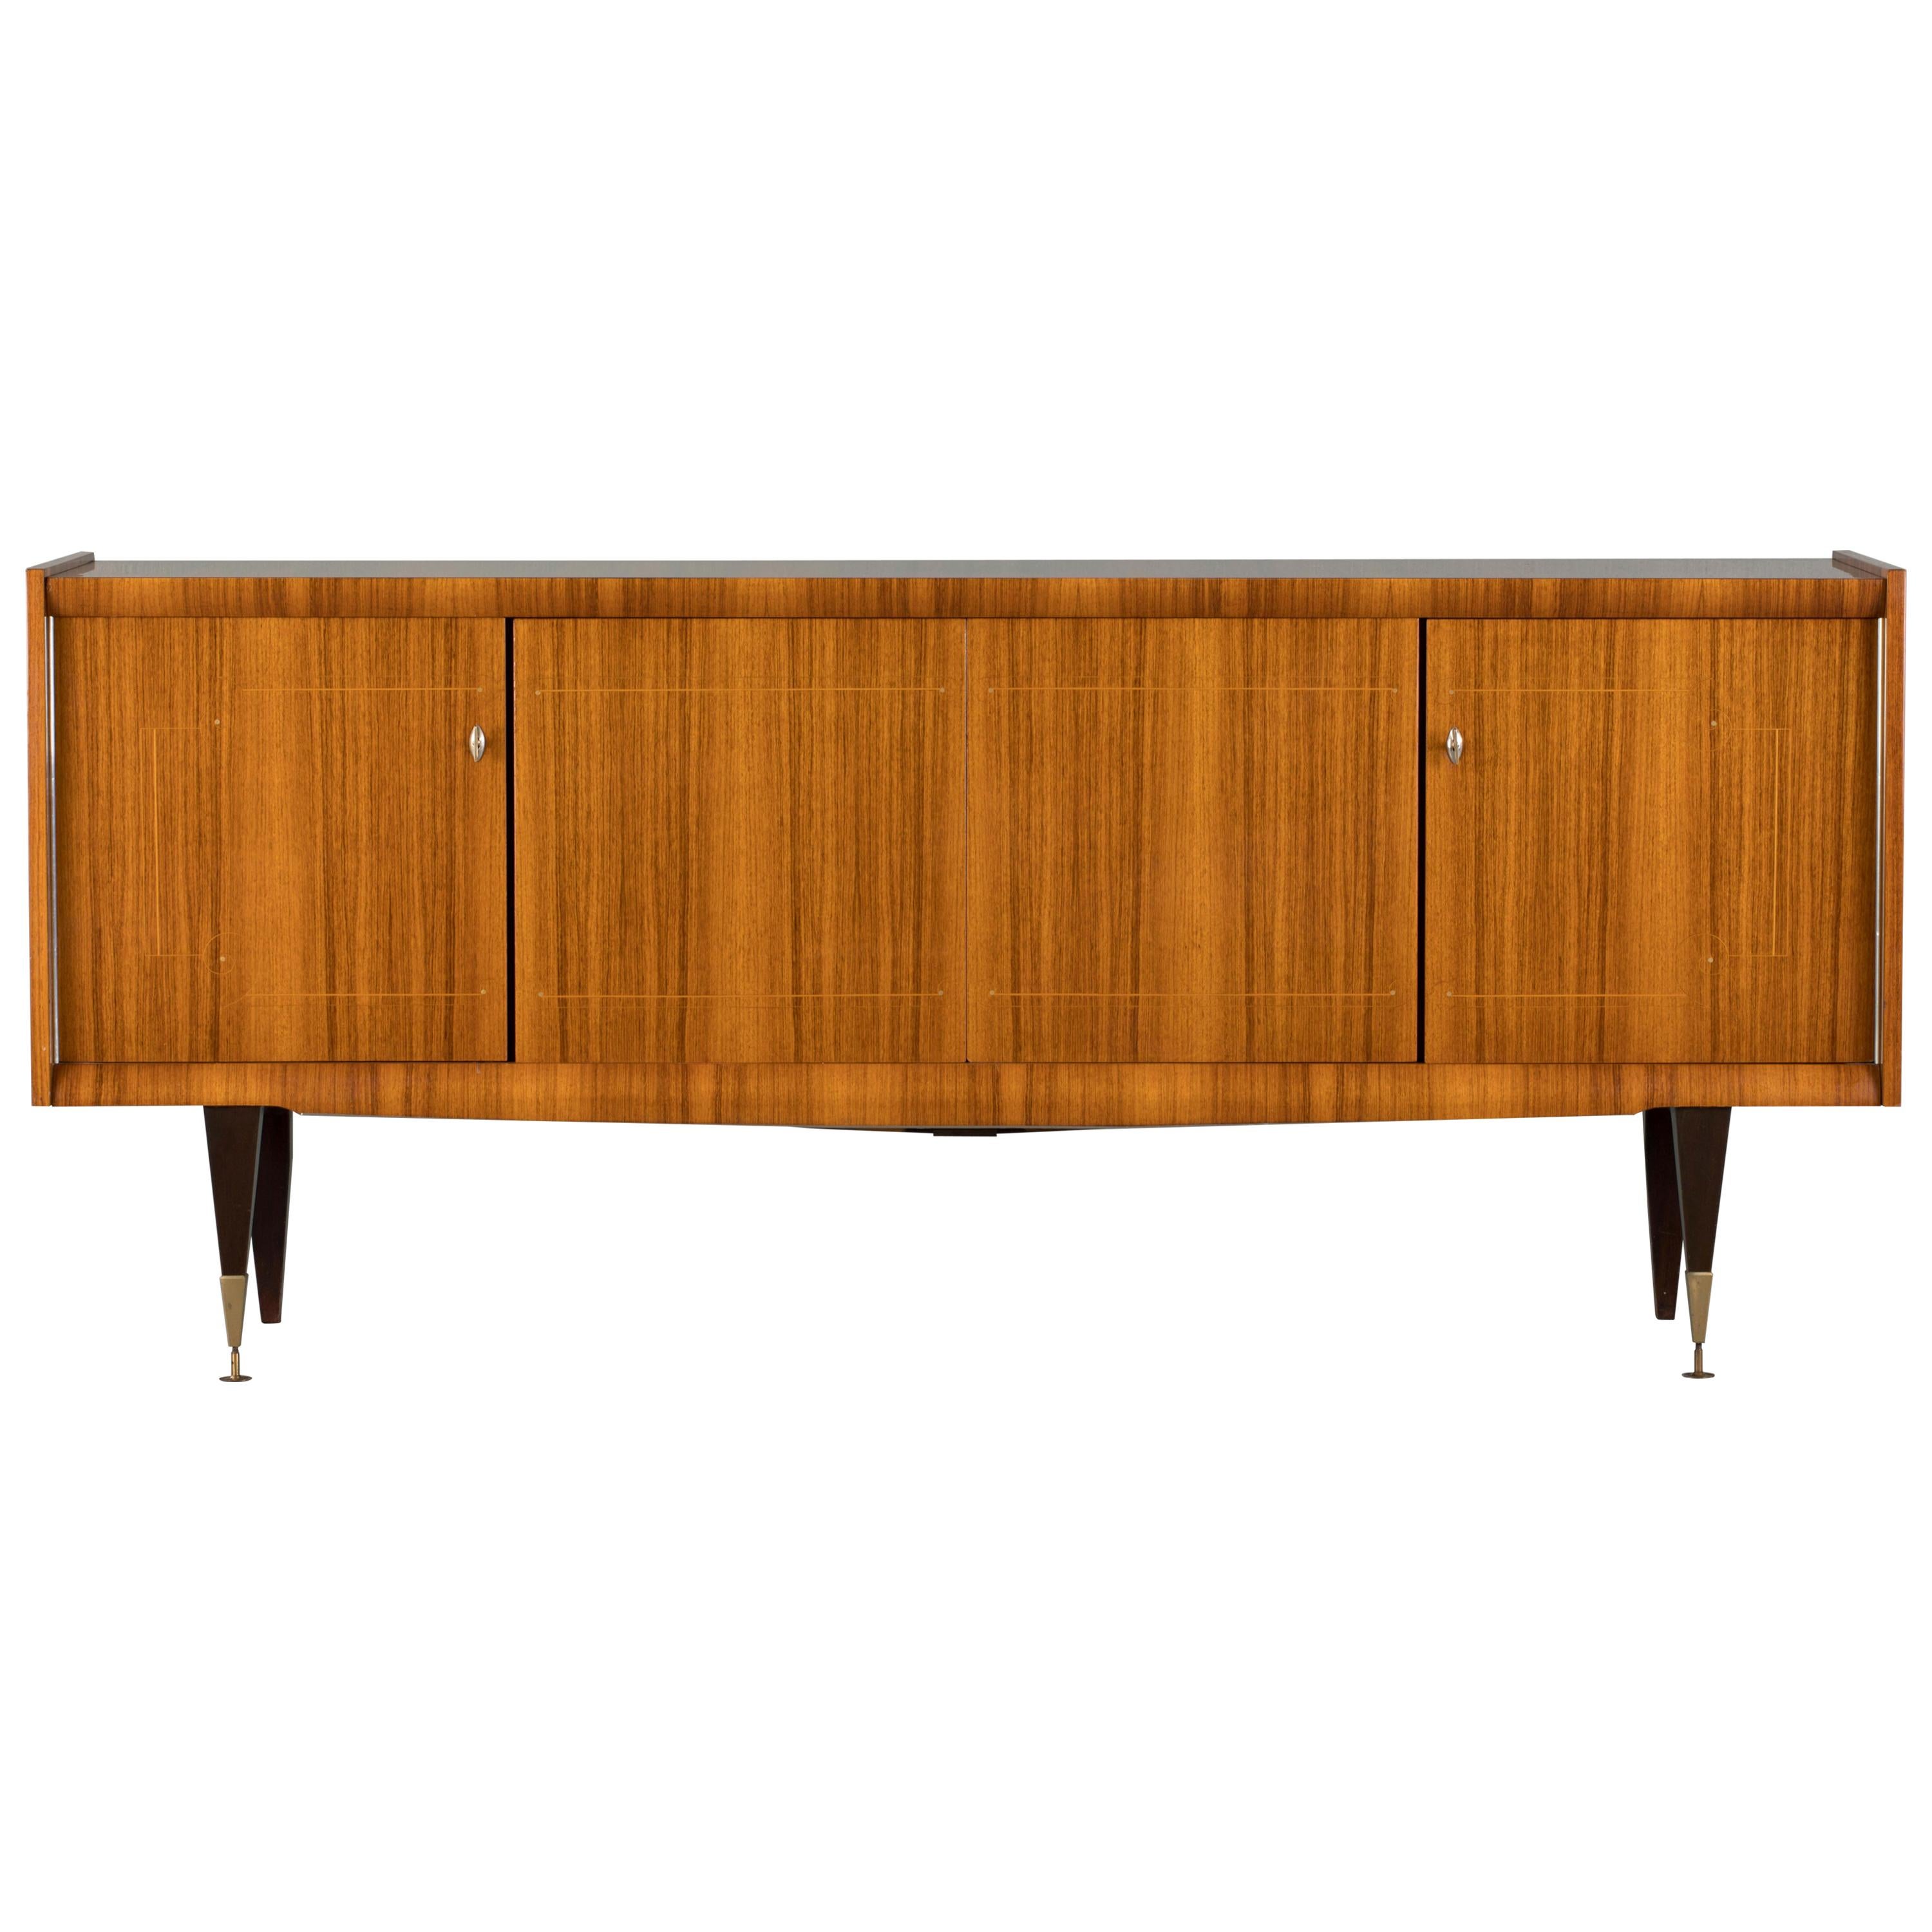 French Art Deco sideboard, credenza, with bar cabinet. The sideboard features stunning Macassar ebony wood grain with a thin decorative mother of pearl inlaid design. It offers ample storage, with shelve behind two doors on the left and a dovetailed